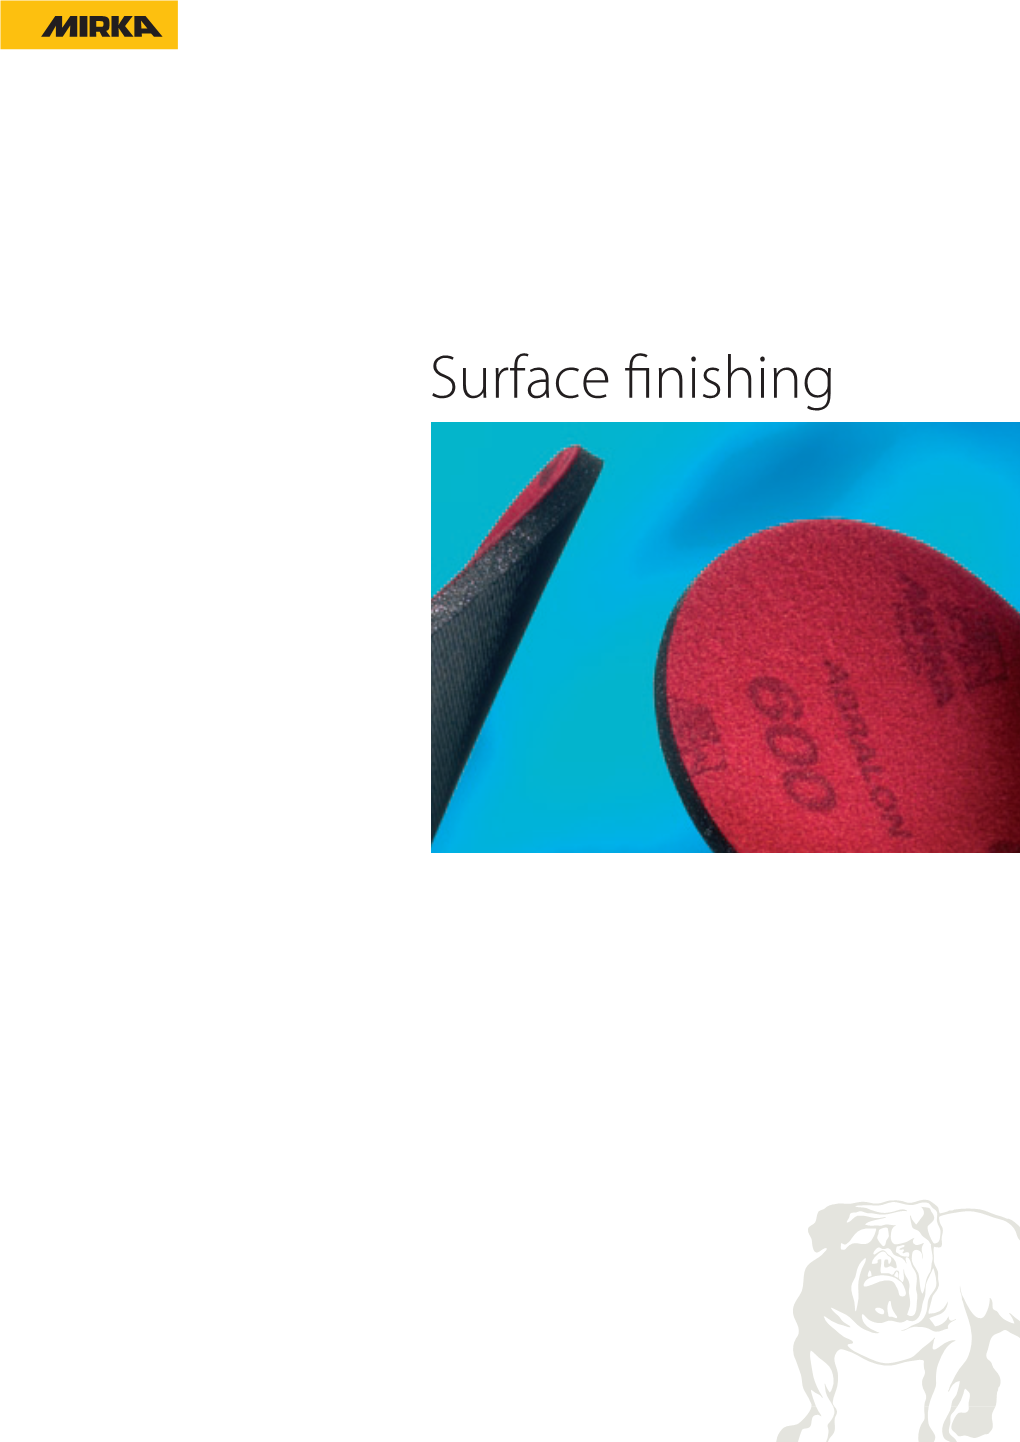 Surface Finishing KWH Mirka Ltd Manufactures and Sells Coated Abrasives for Demanding Conditions